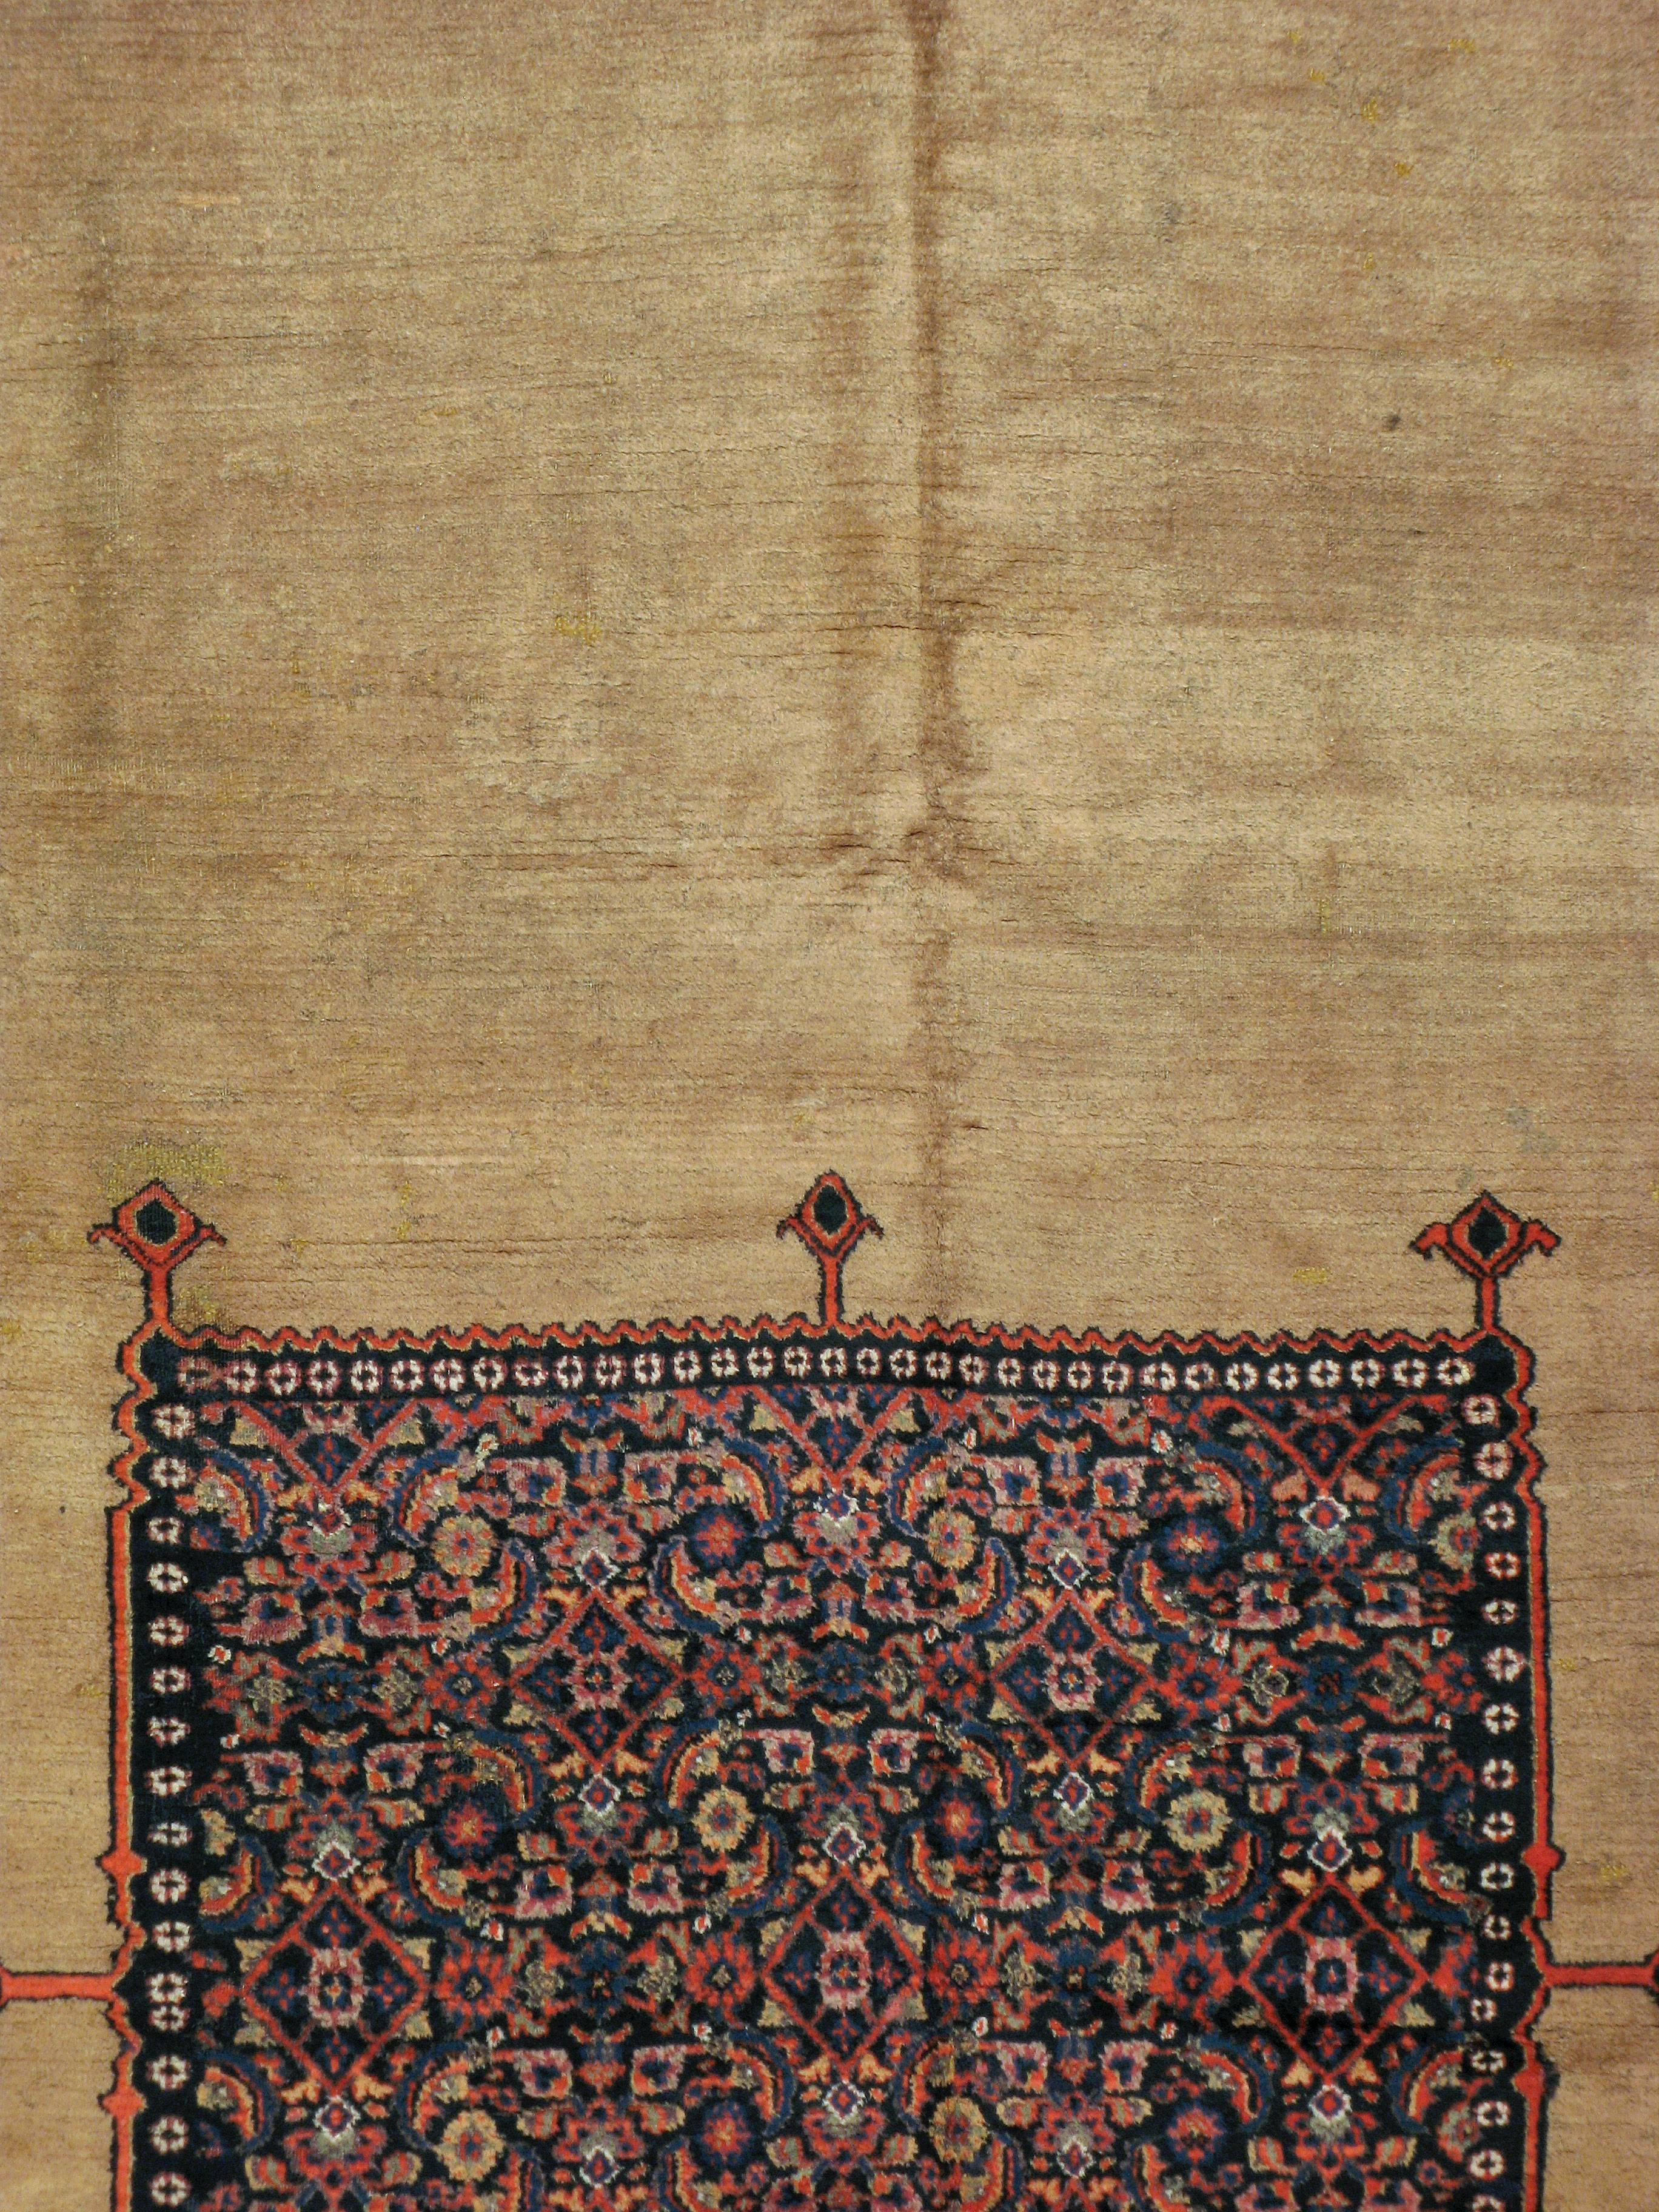 An antique Persian Dorokhsh carpet from the late 19th century. The carpet consists of several motifs, such as a border with a 